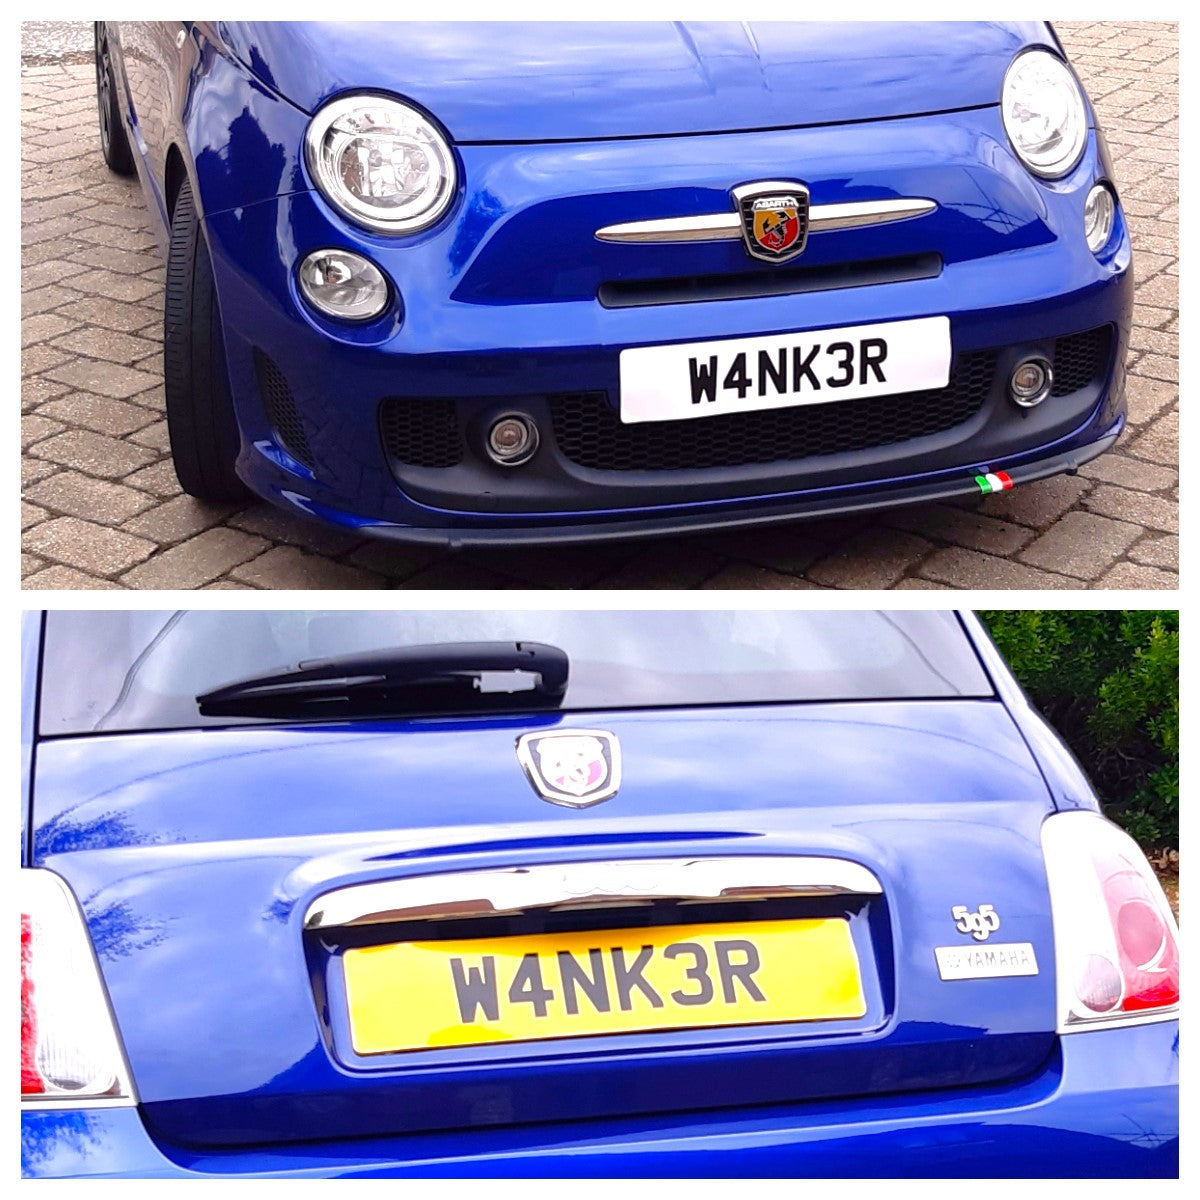 2 Joke Number Plate Stickers With "W4NK3R"